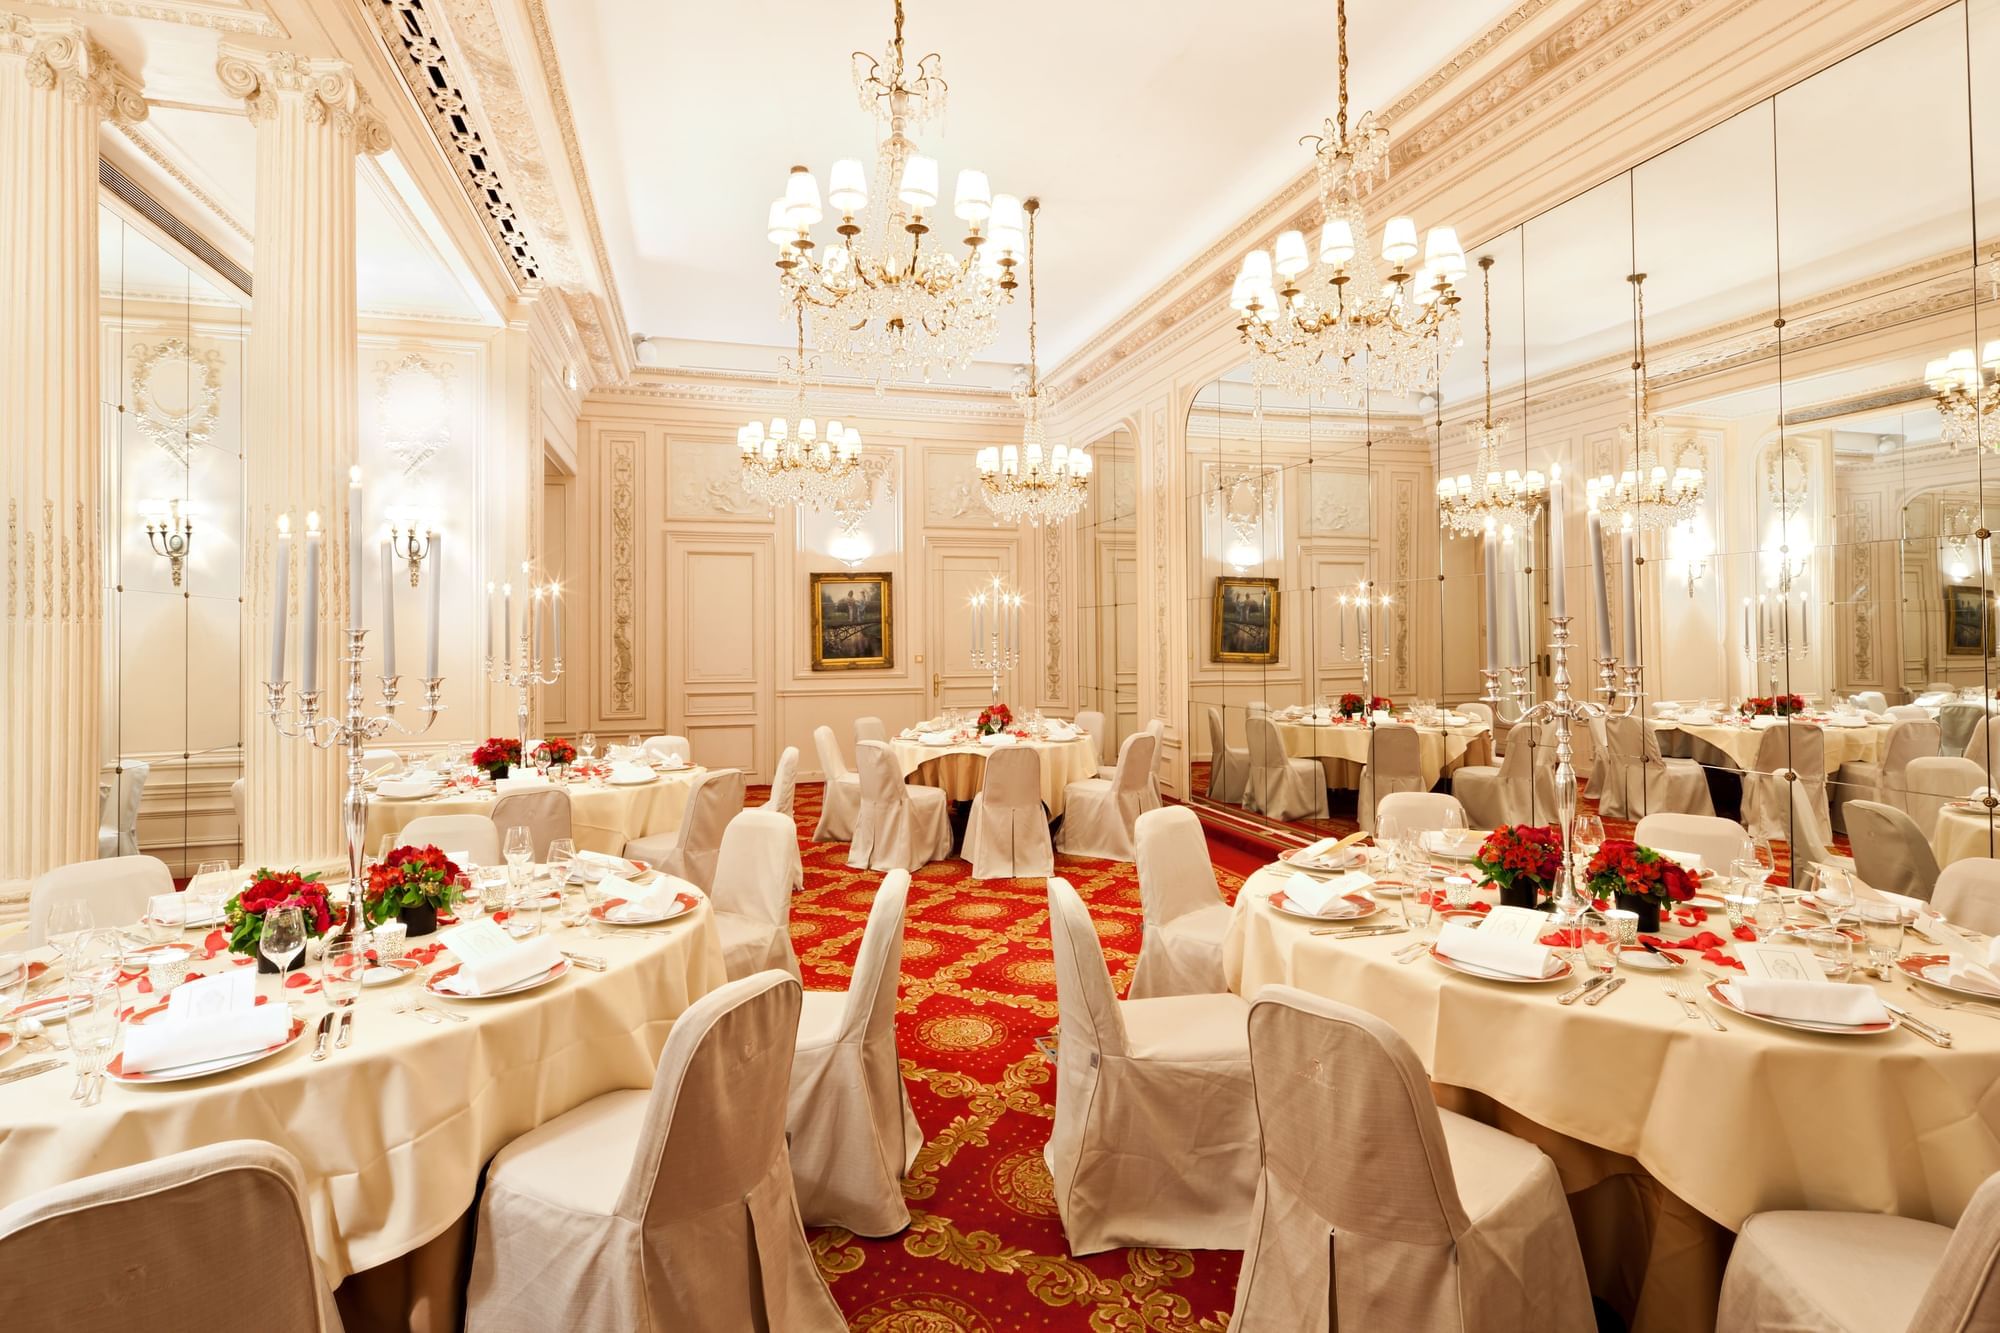 Banquet table set-up in an event hall at Hôtel Westminster - Paris